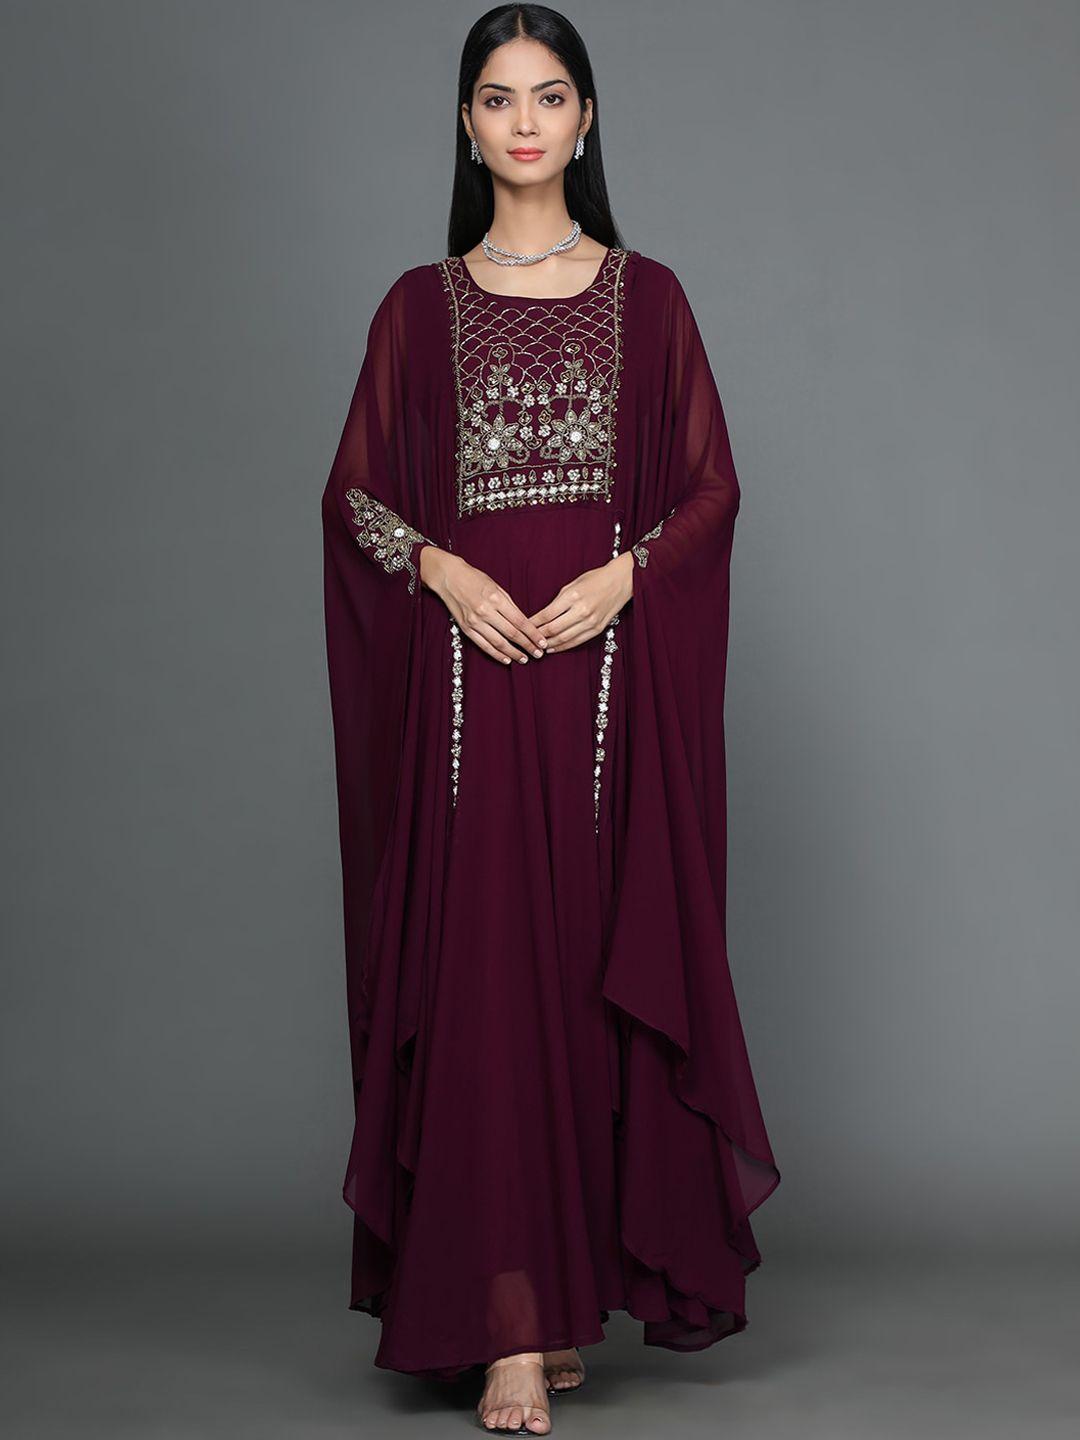 kalini-embroidered-beads-&-stones-georgette-fit-&-flared-maxi-ethnic-dress